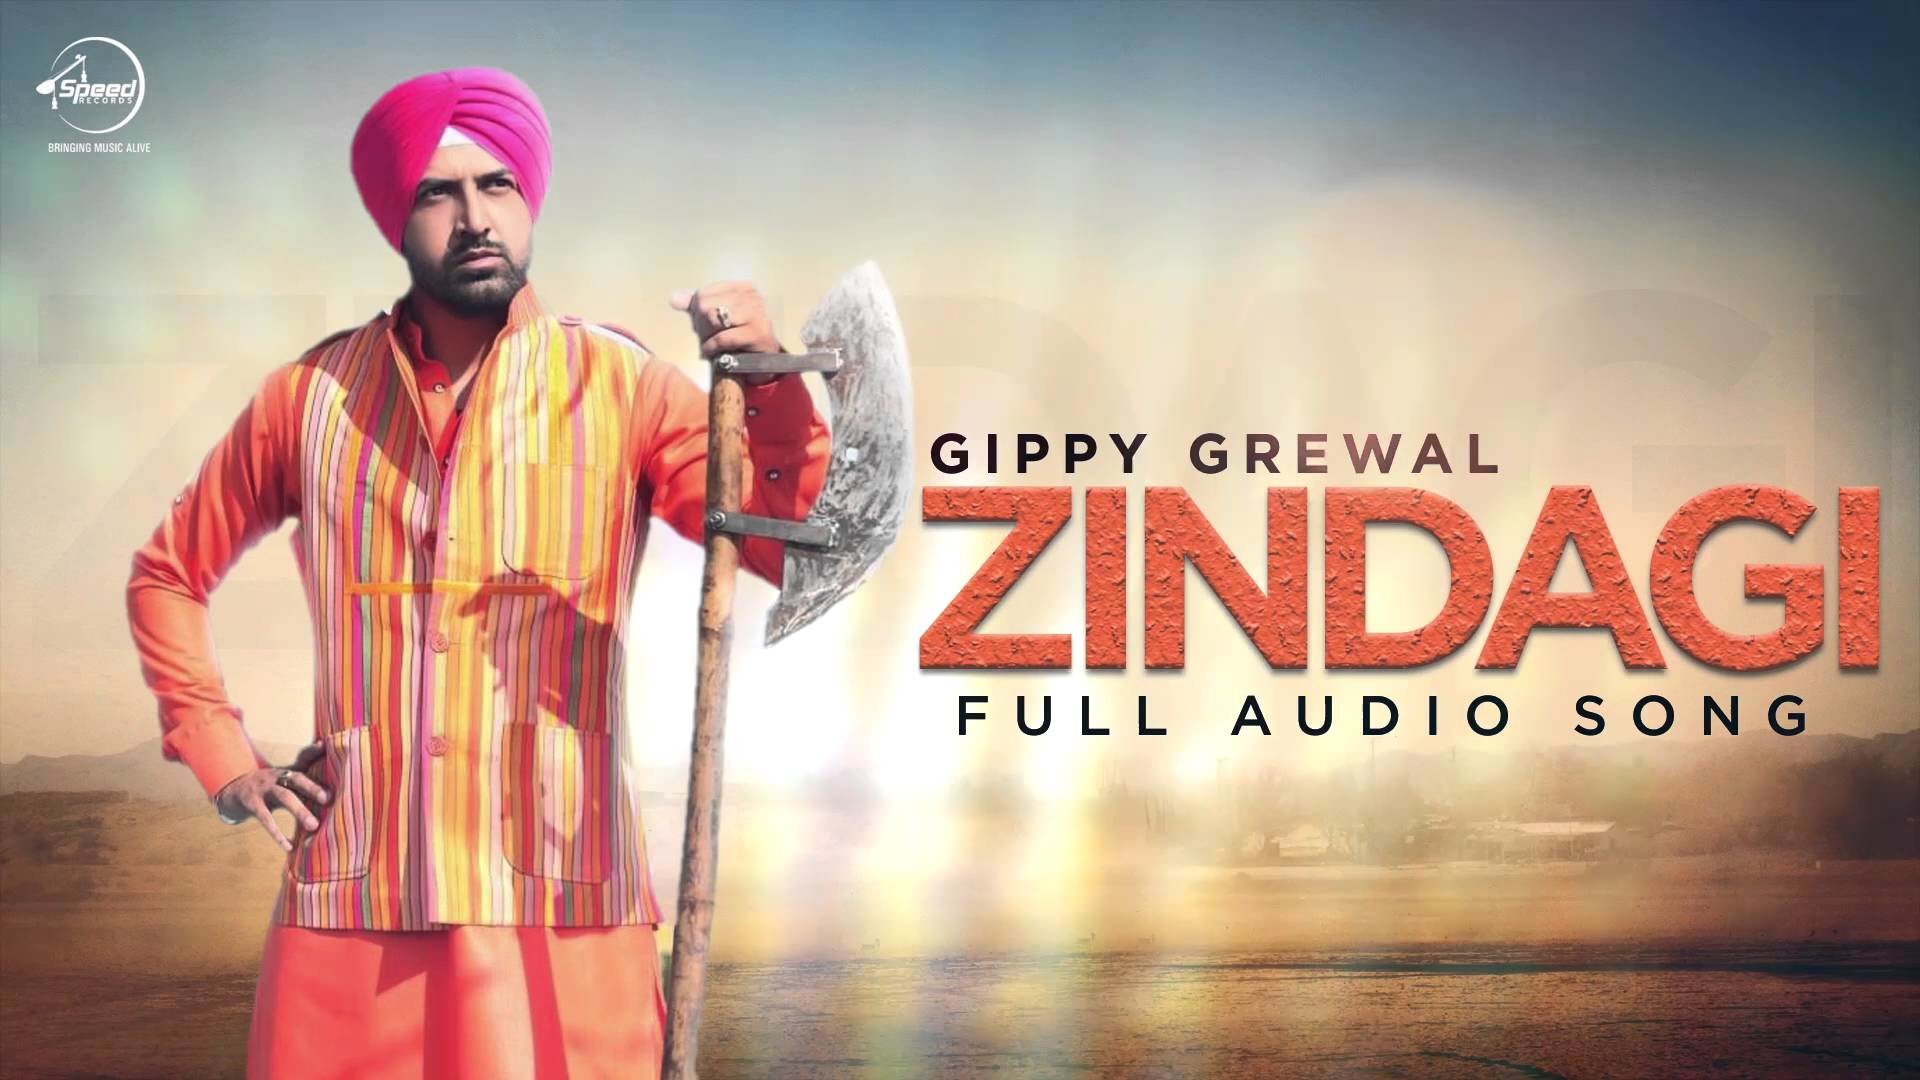 1920x1080 Sardarjistuff gives latest wallpapers of celebrities. See gippy grewal new  2017 Wallpapers, images.